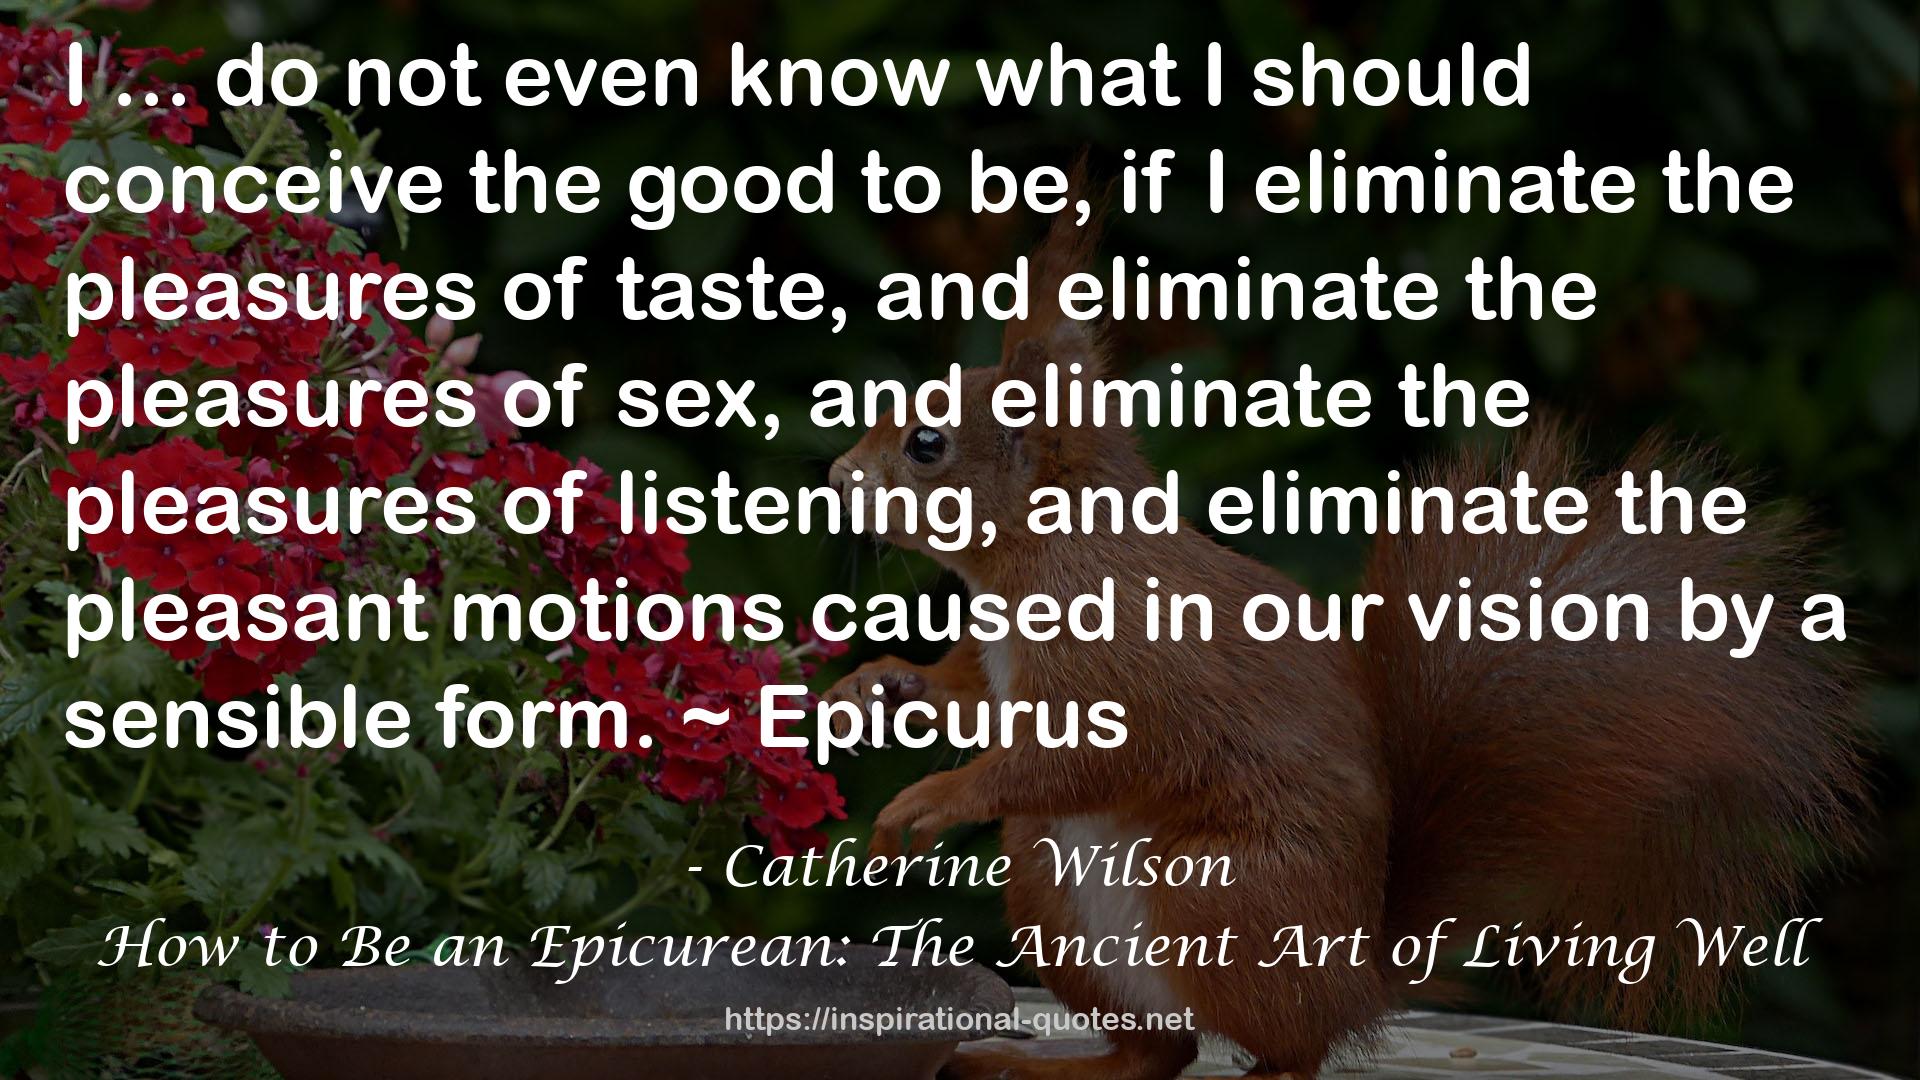 How to Be an Epicurean: The Ancient Art of Living Well QUOTES